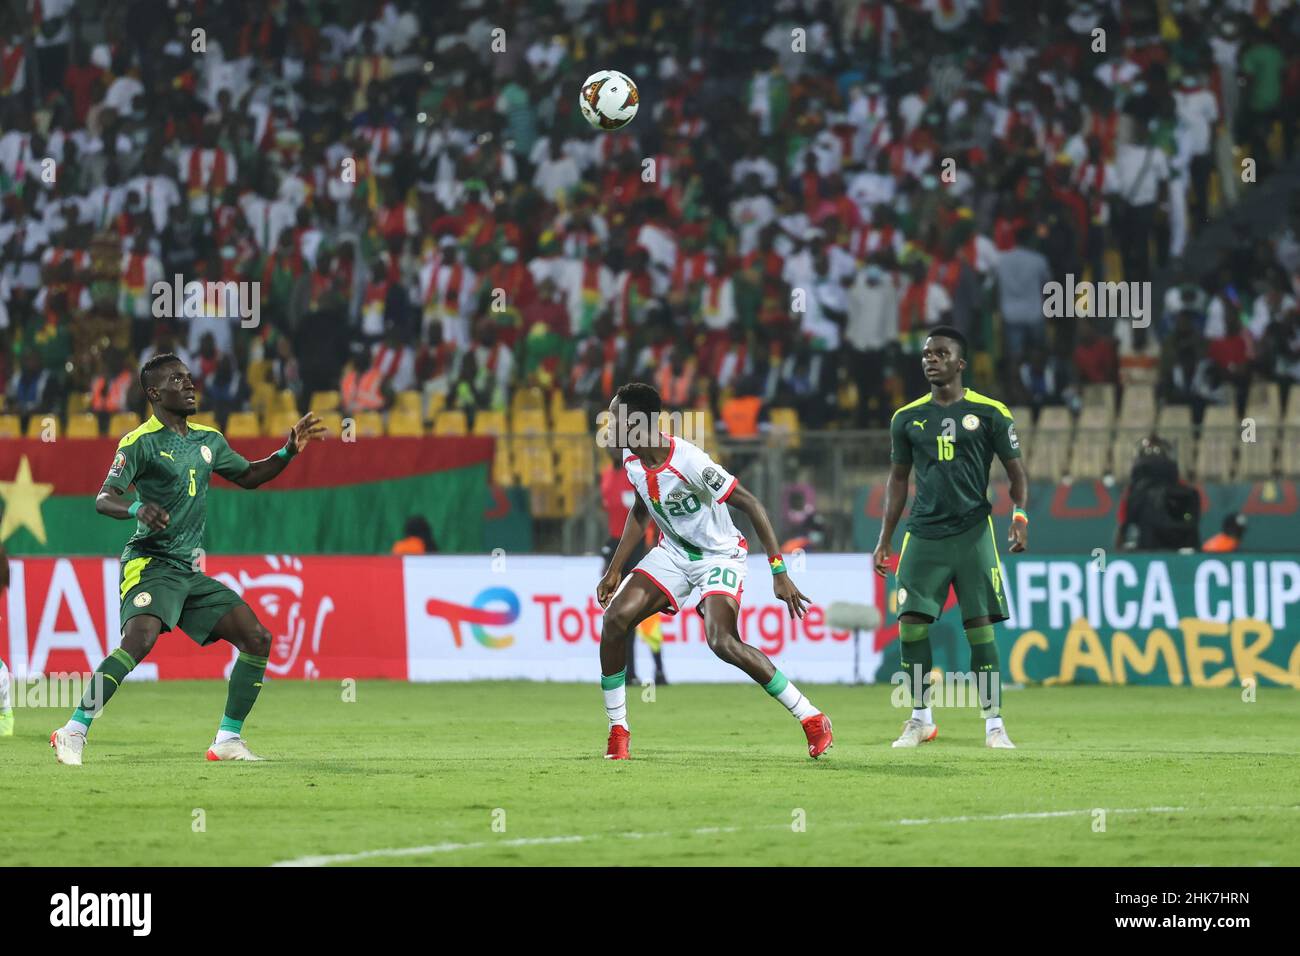 CAMEROON, Yaounde, 02 February 2022 - Gustavo Sangare of Burkina Faso and Idrissa Gueye of Senegal during the Africa Cup of Nations play offs semi final match between Burkina Faso and Senegal at Stade Ahmadou Ahidjo,Yaounde, Cameroon, 02/02/2022/ Photo by SF Stock Photo